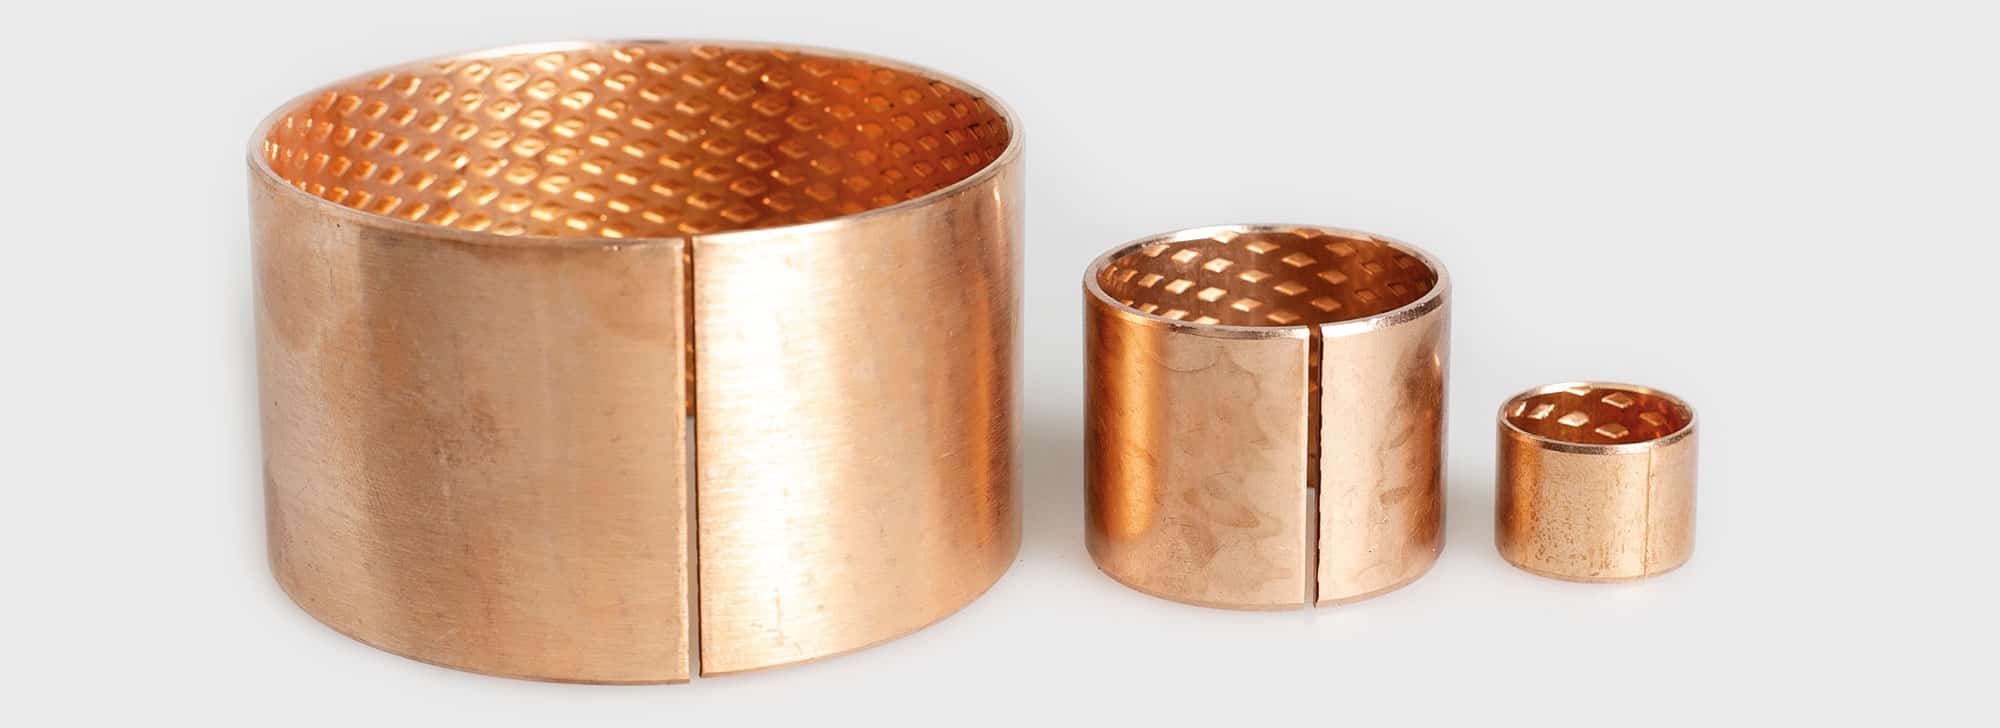 Applications of Wrapped Bronze Bushings